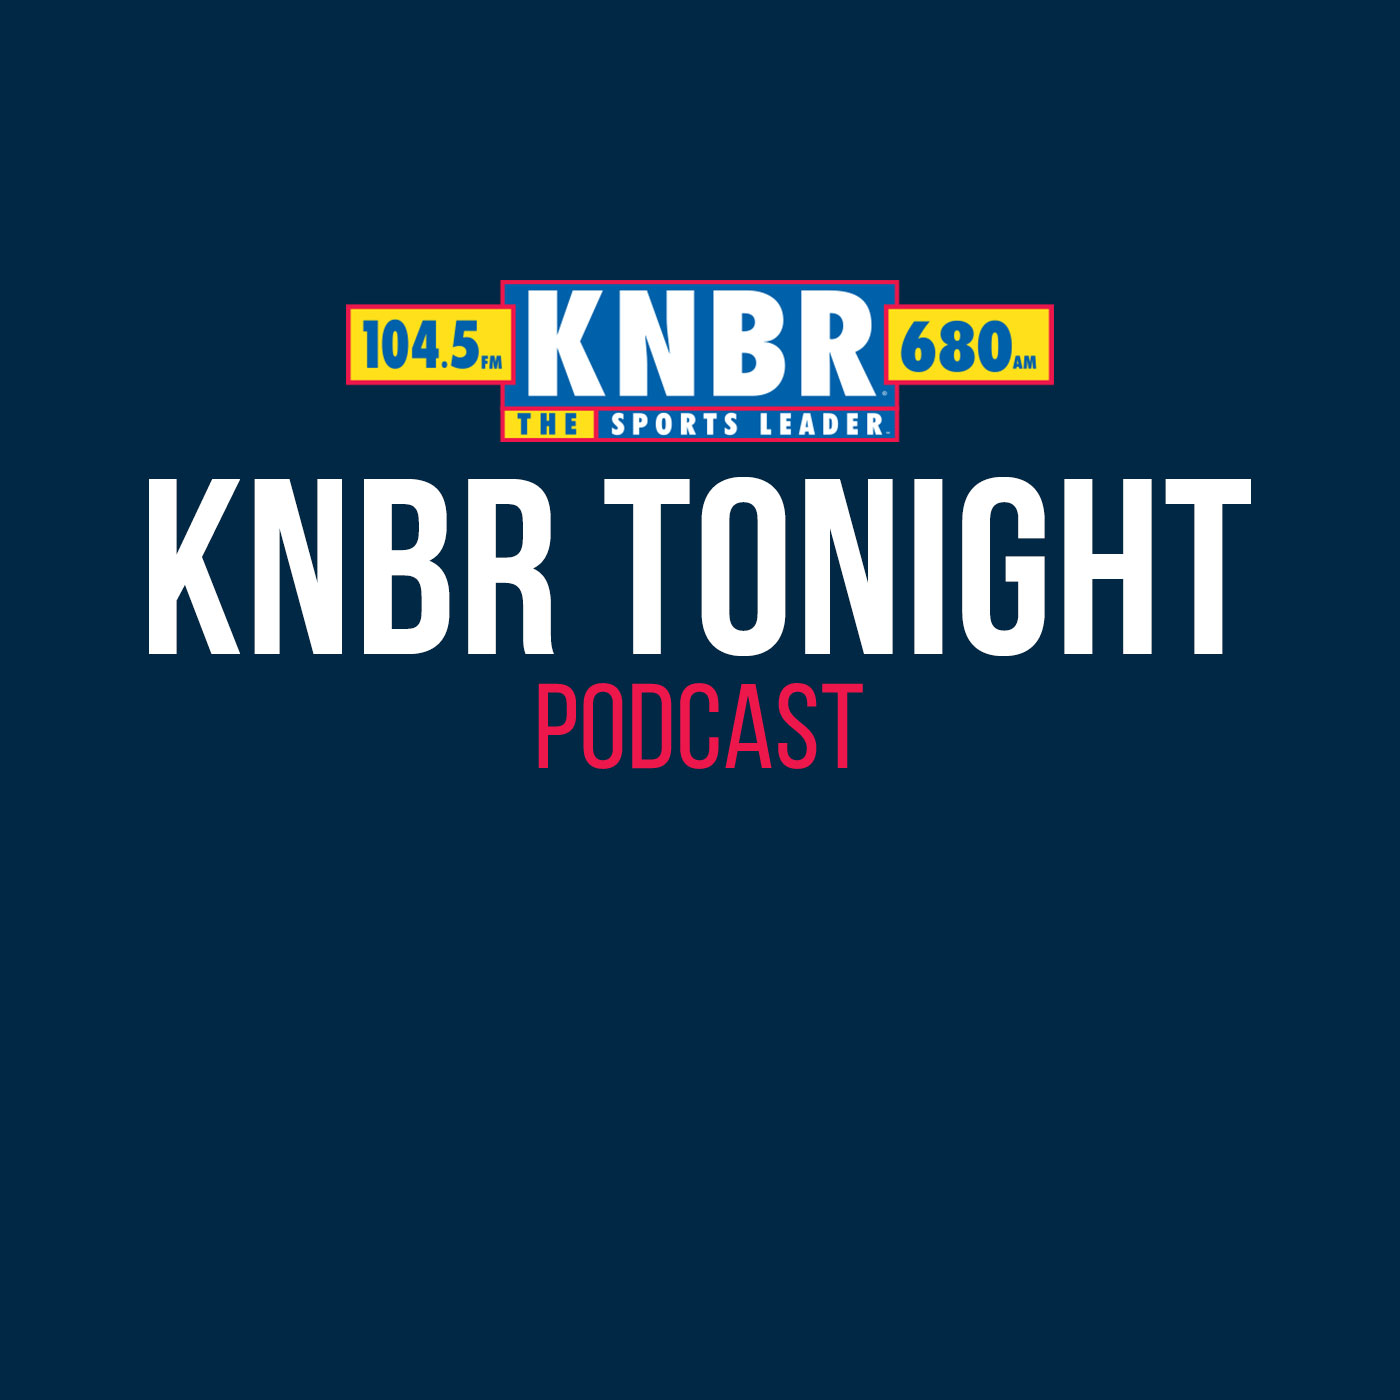 3-15 Renel Brooks-Moon joins KNBR Tonight and HYPED UP for the return of baseball